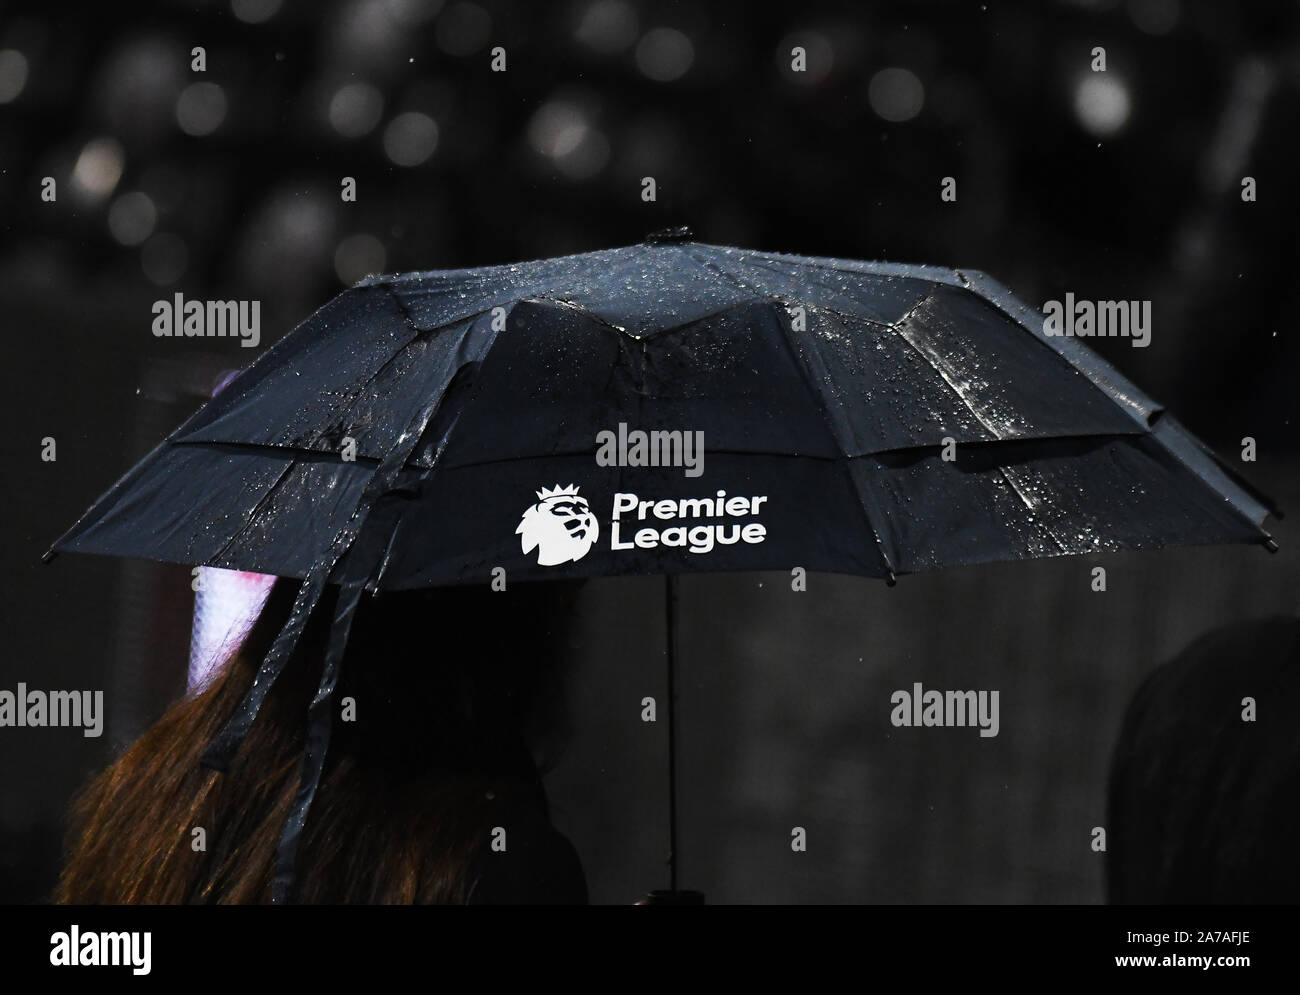 LONDON, ENGLAND - DECEMBER 15, 2018: A Premier League branded umbrella pictured prior to the 2018/19 Premier League game between Fulham FC and West Ham United at Craven Cottage. Stock Photo